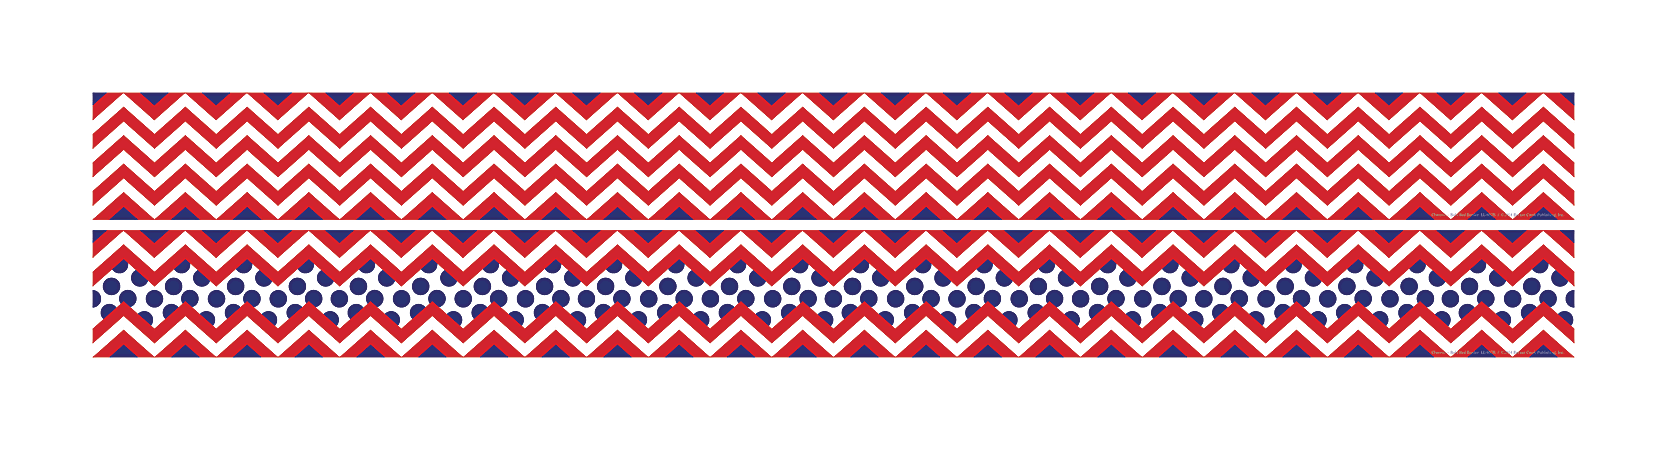 Barker Creek Double-Sided Straight-Edge Border Strips, 3" x 35", Chevron Red, Pack Of 12